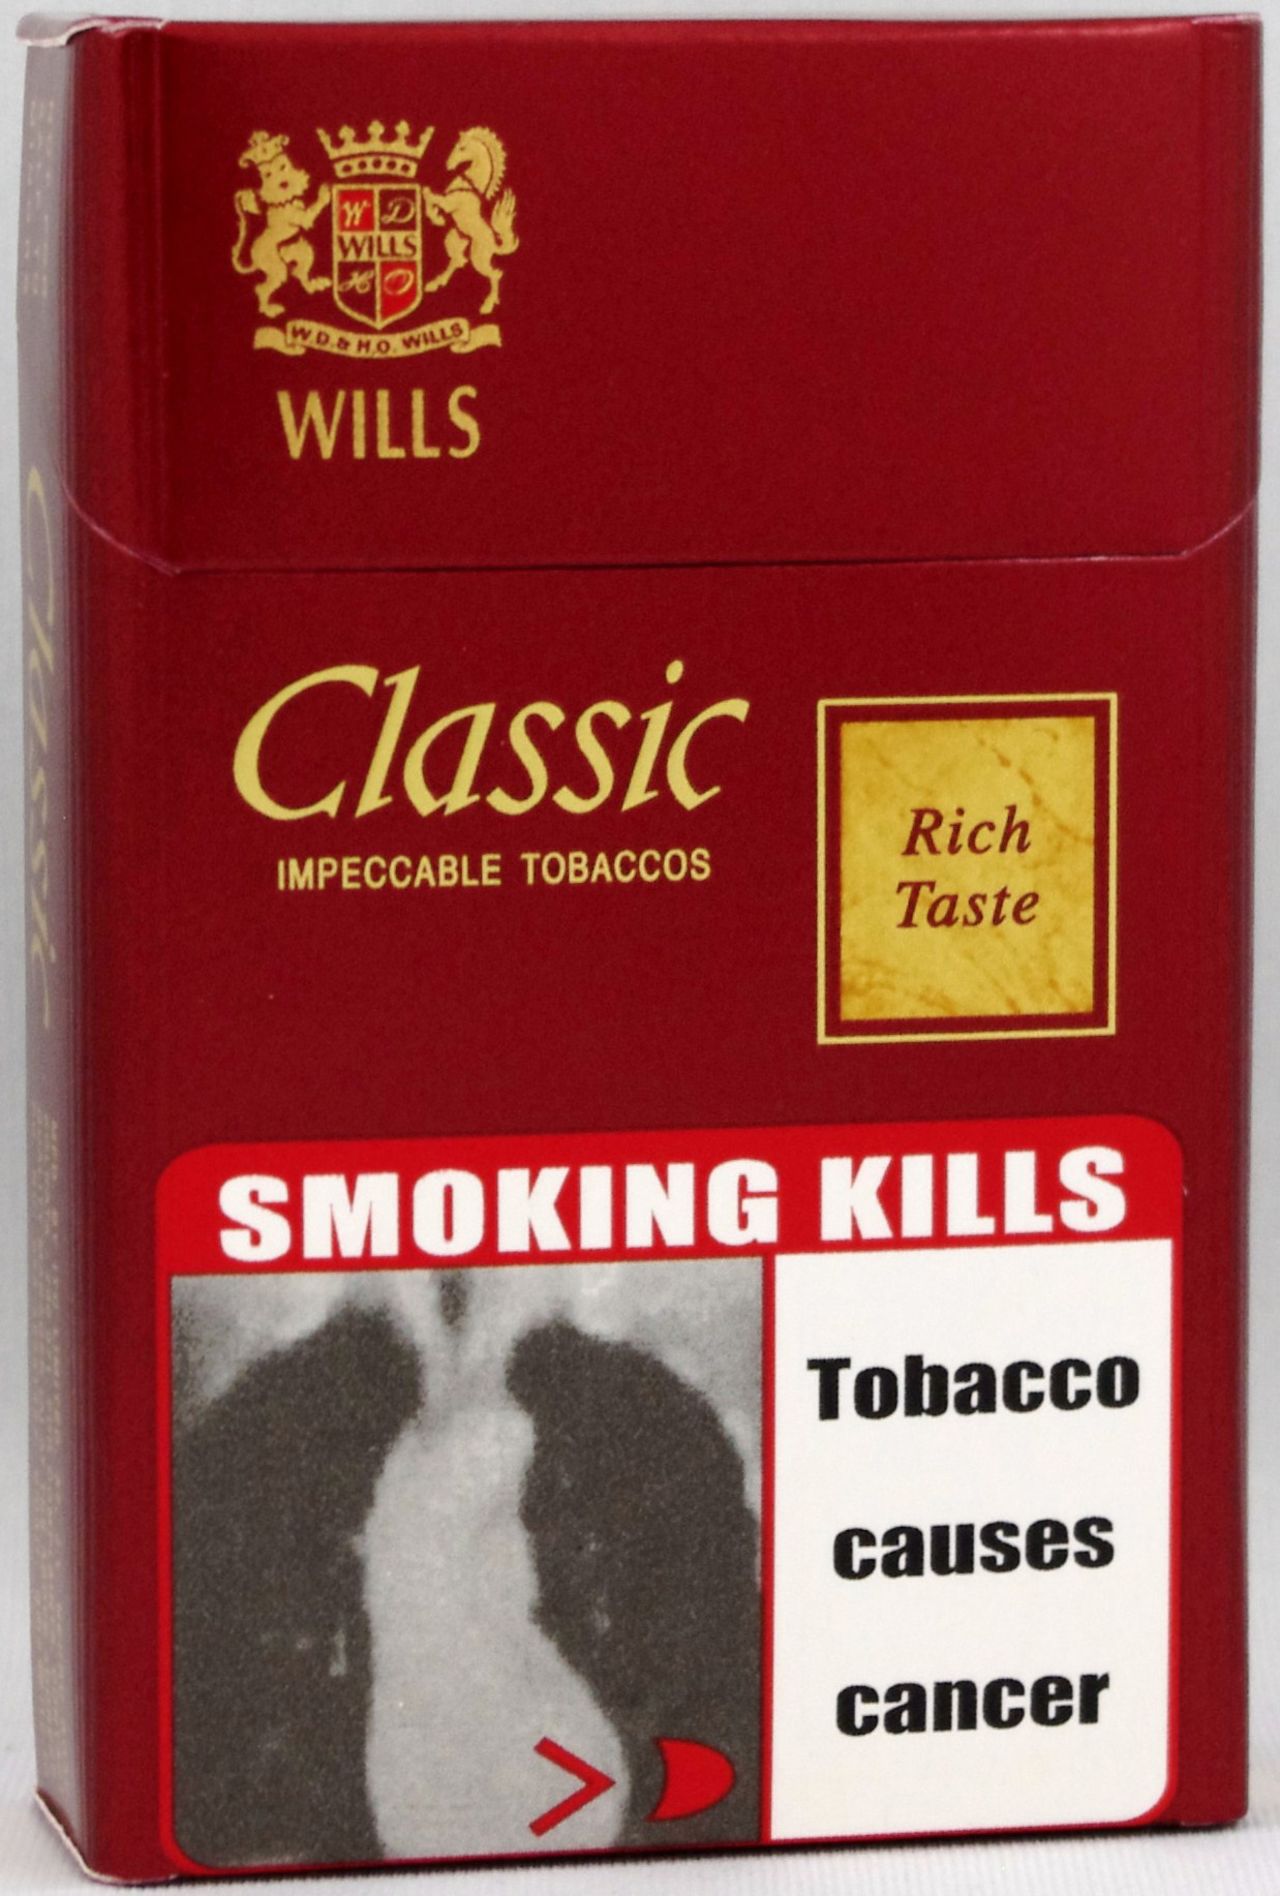 According to the World Health Organization, picture warnings are required on tobacco packages in 42 countries, like this graphic warning in India.